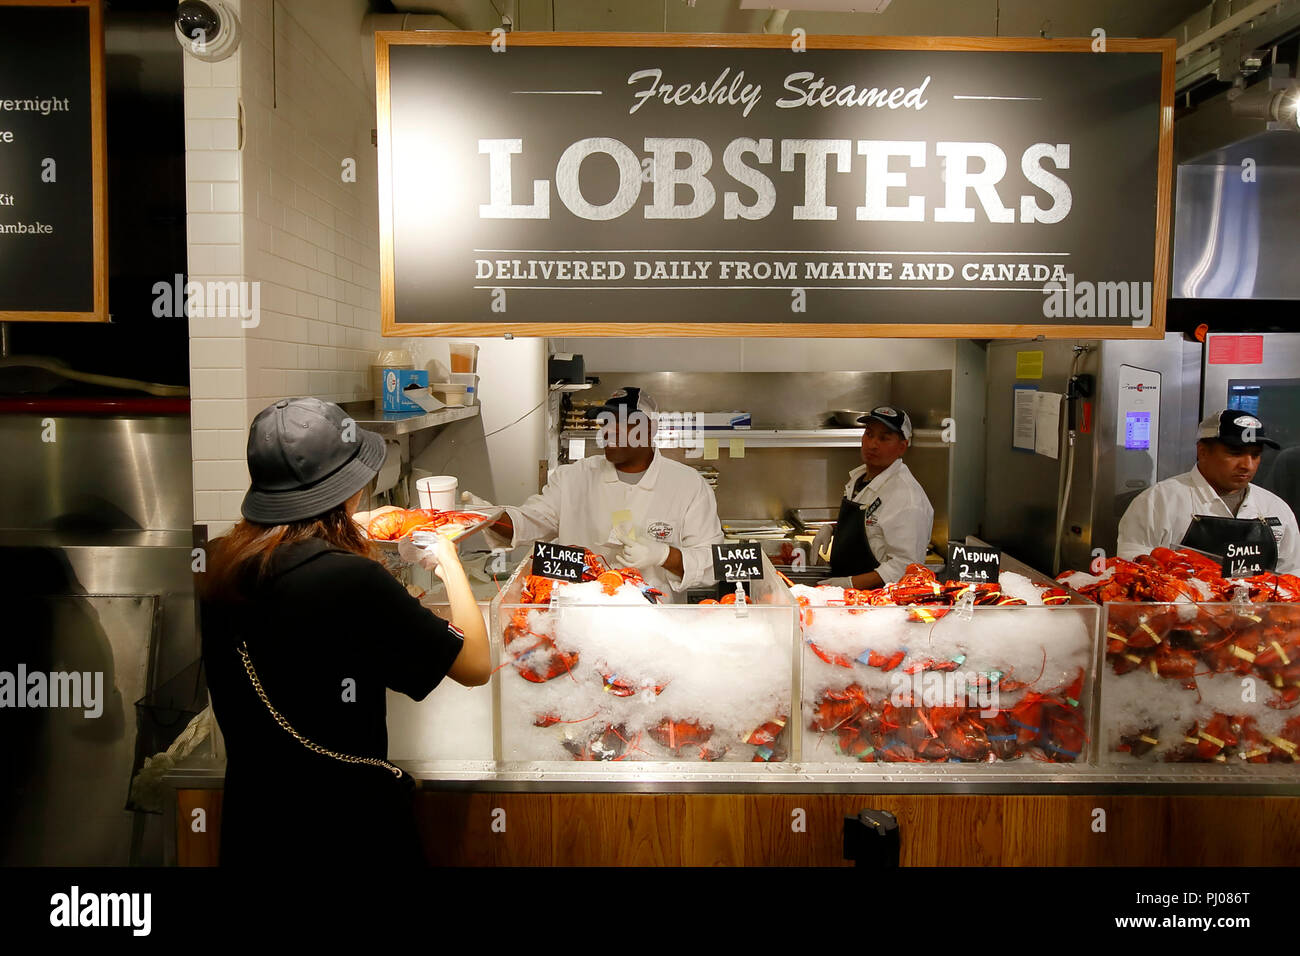 A customer receives a freshly steamed lobster at the Lobster Place inside the Chelsea Market, New York, NY. Stock Photo